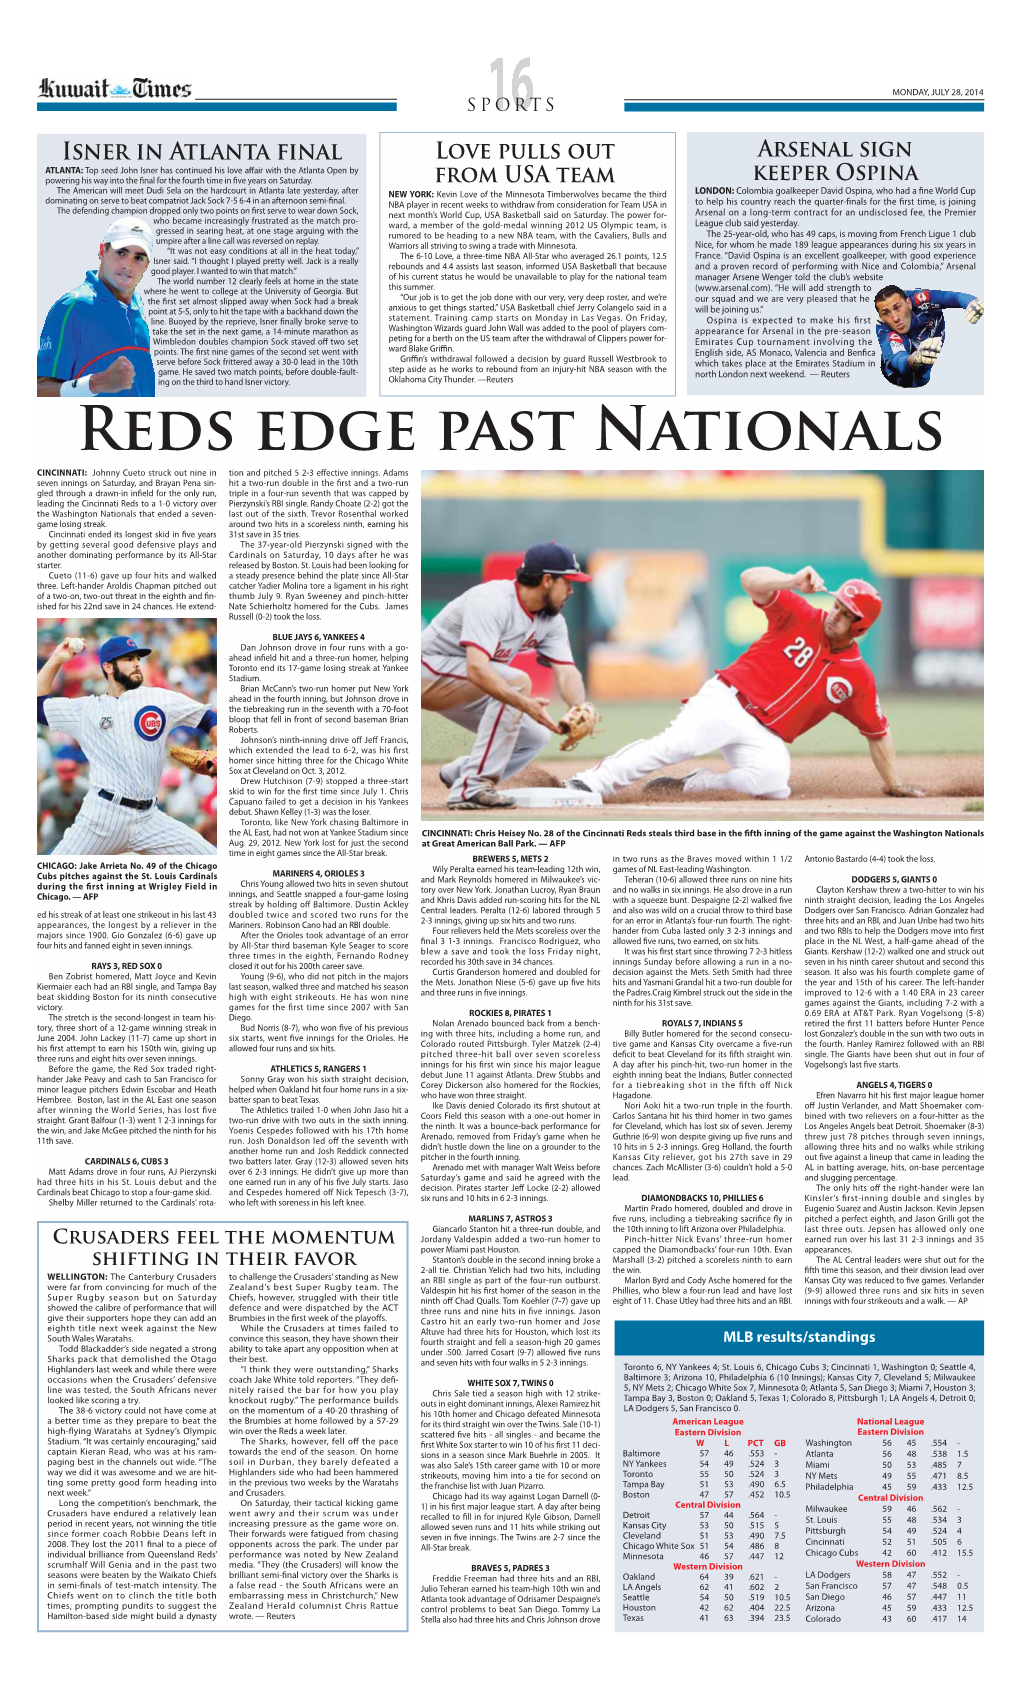 Reds Edge Past Nationals